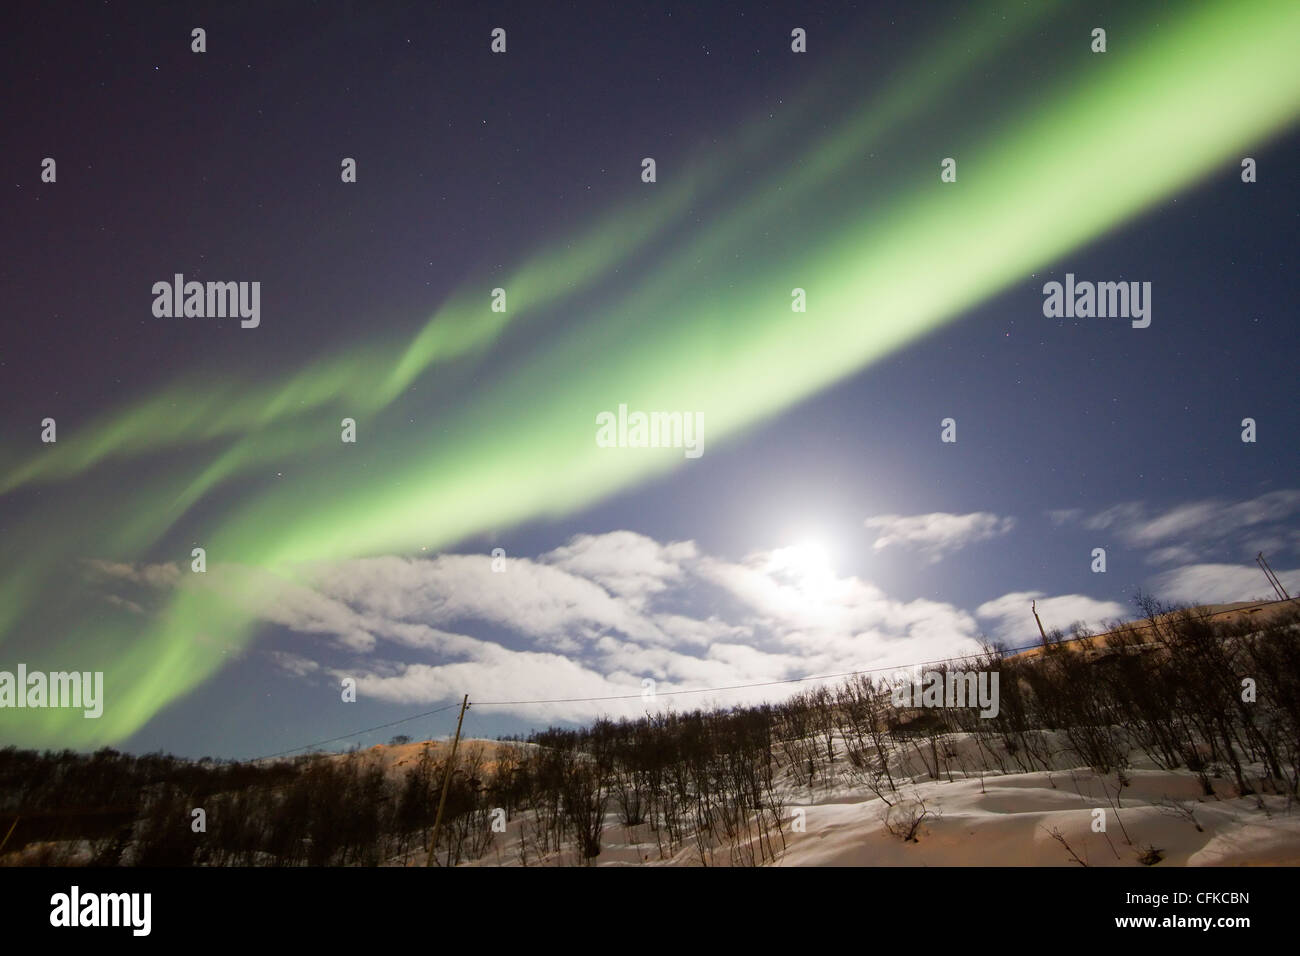 Aurora borealis or northern lights moving across night sky within the Arctic Circle Tromso Troms norway 2012 Stock Photo